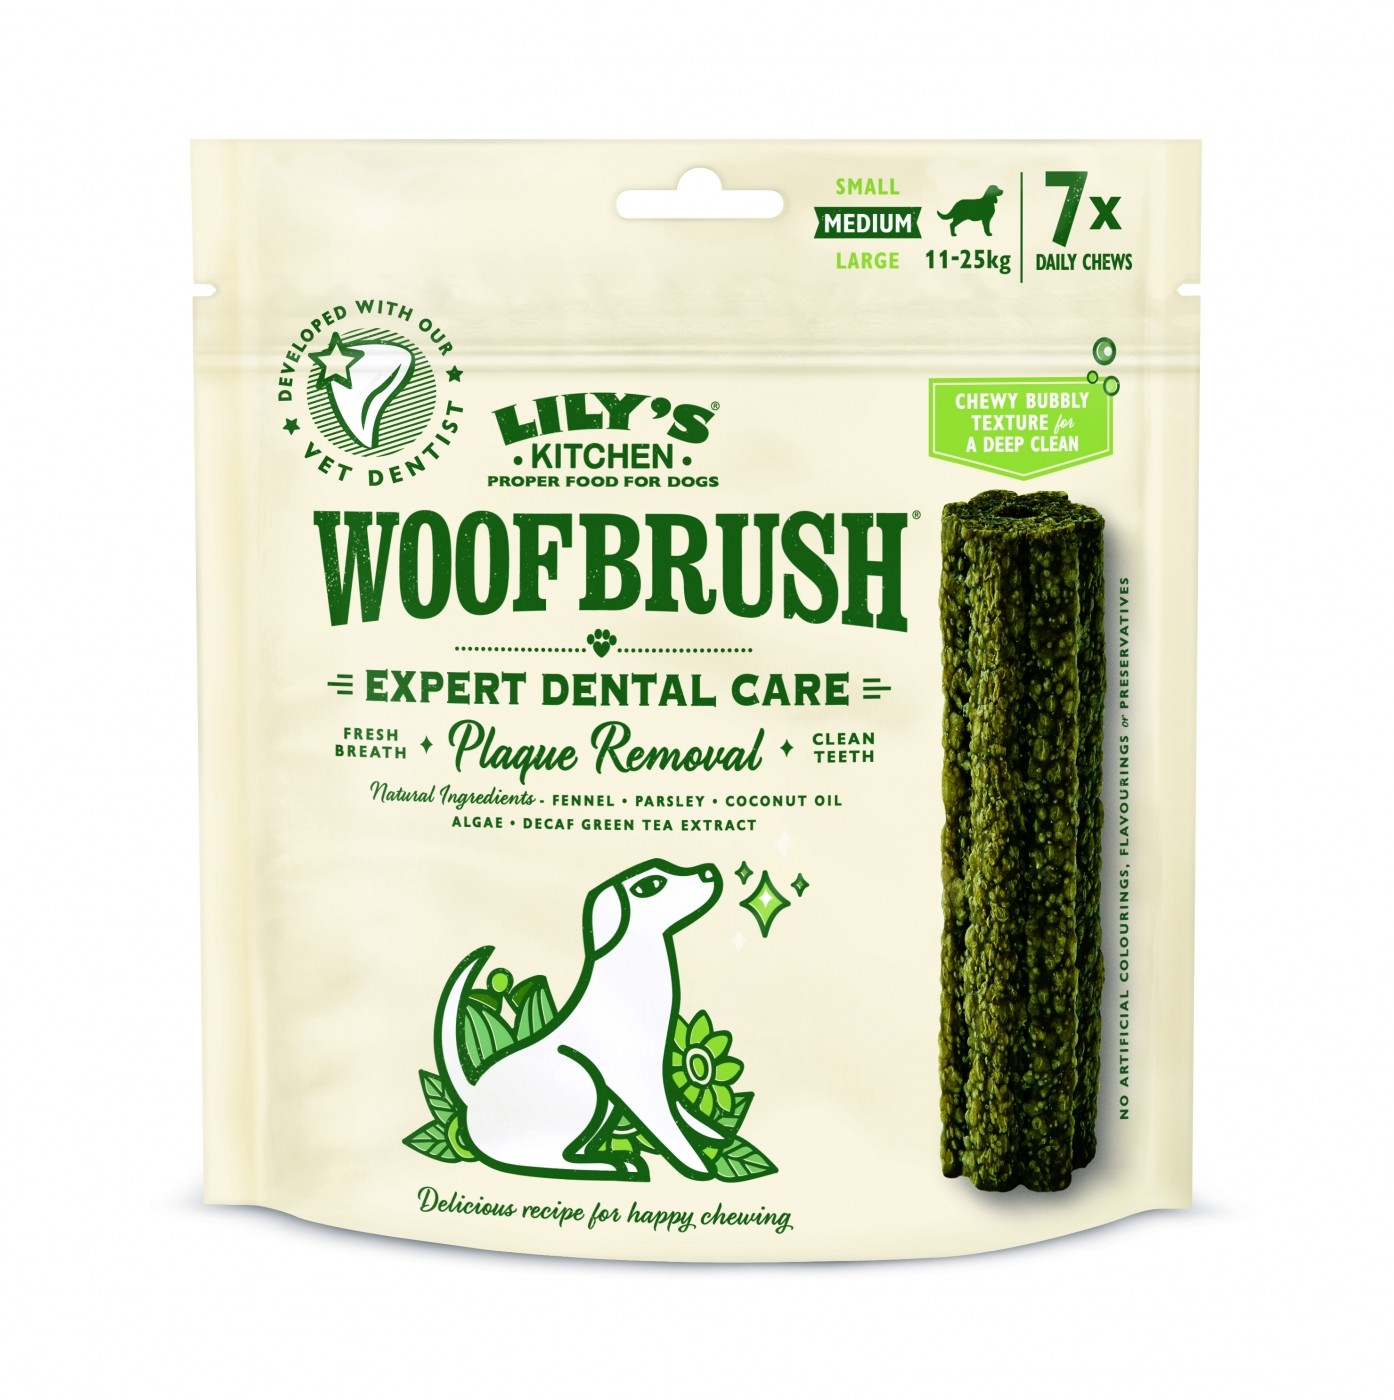 LILY'S KITCHEN Woofbrush Snacks dentales para perros